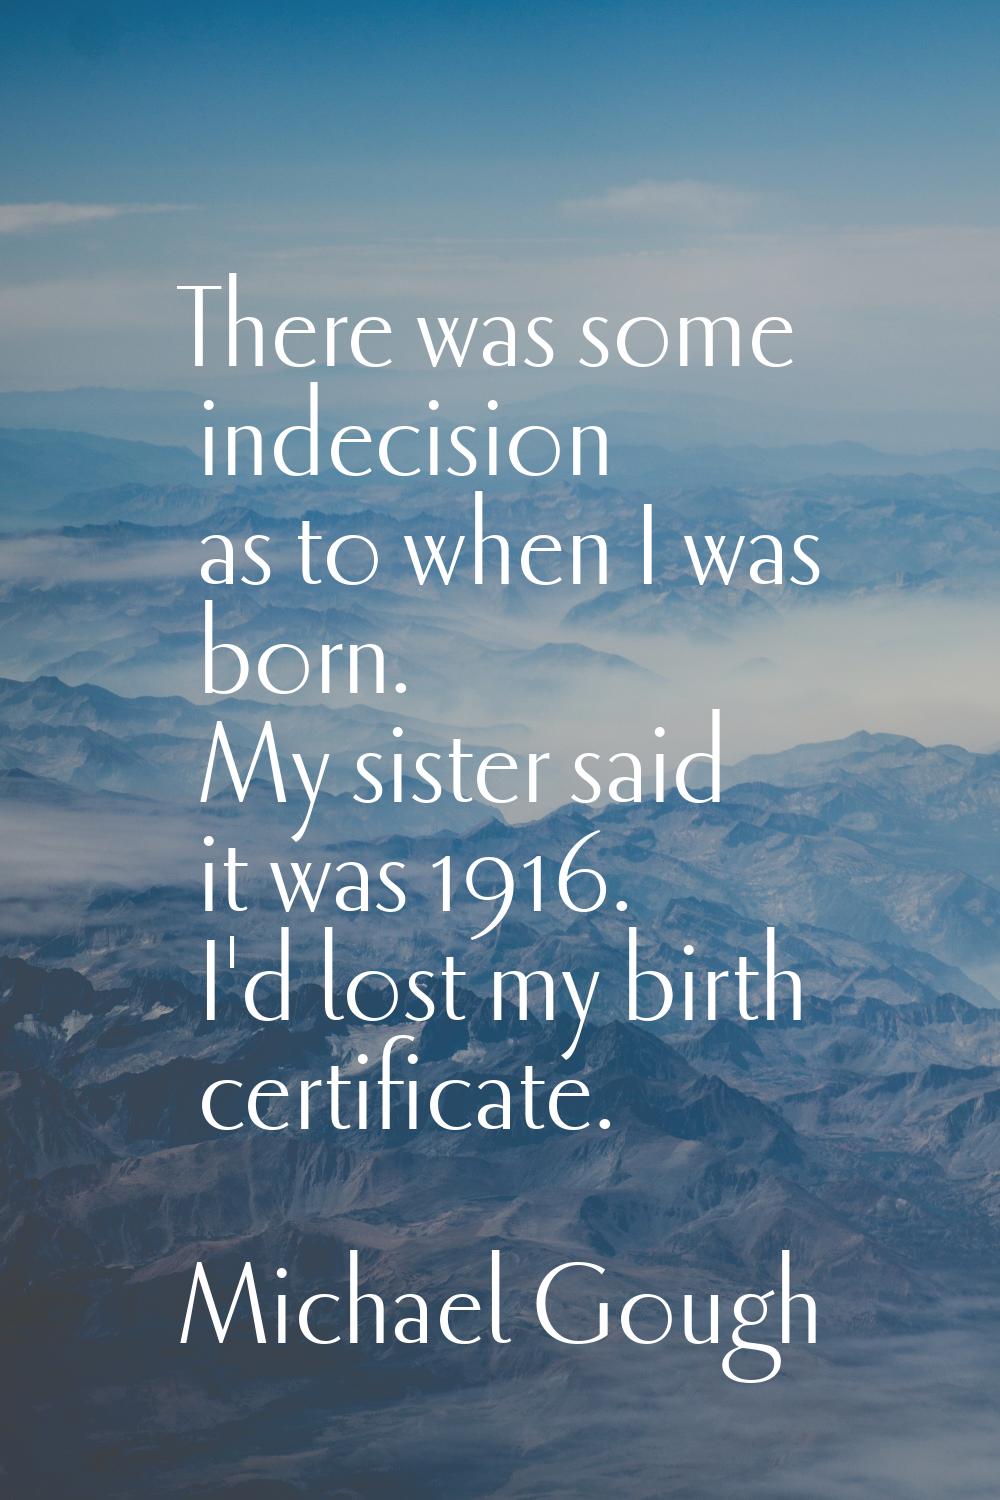 There was some indecision as to when I was born. My sister said it was 1916. I'd lost my birth cert